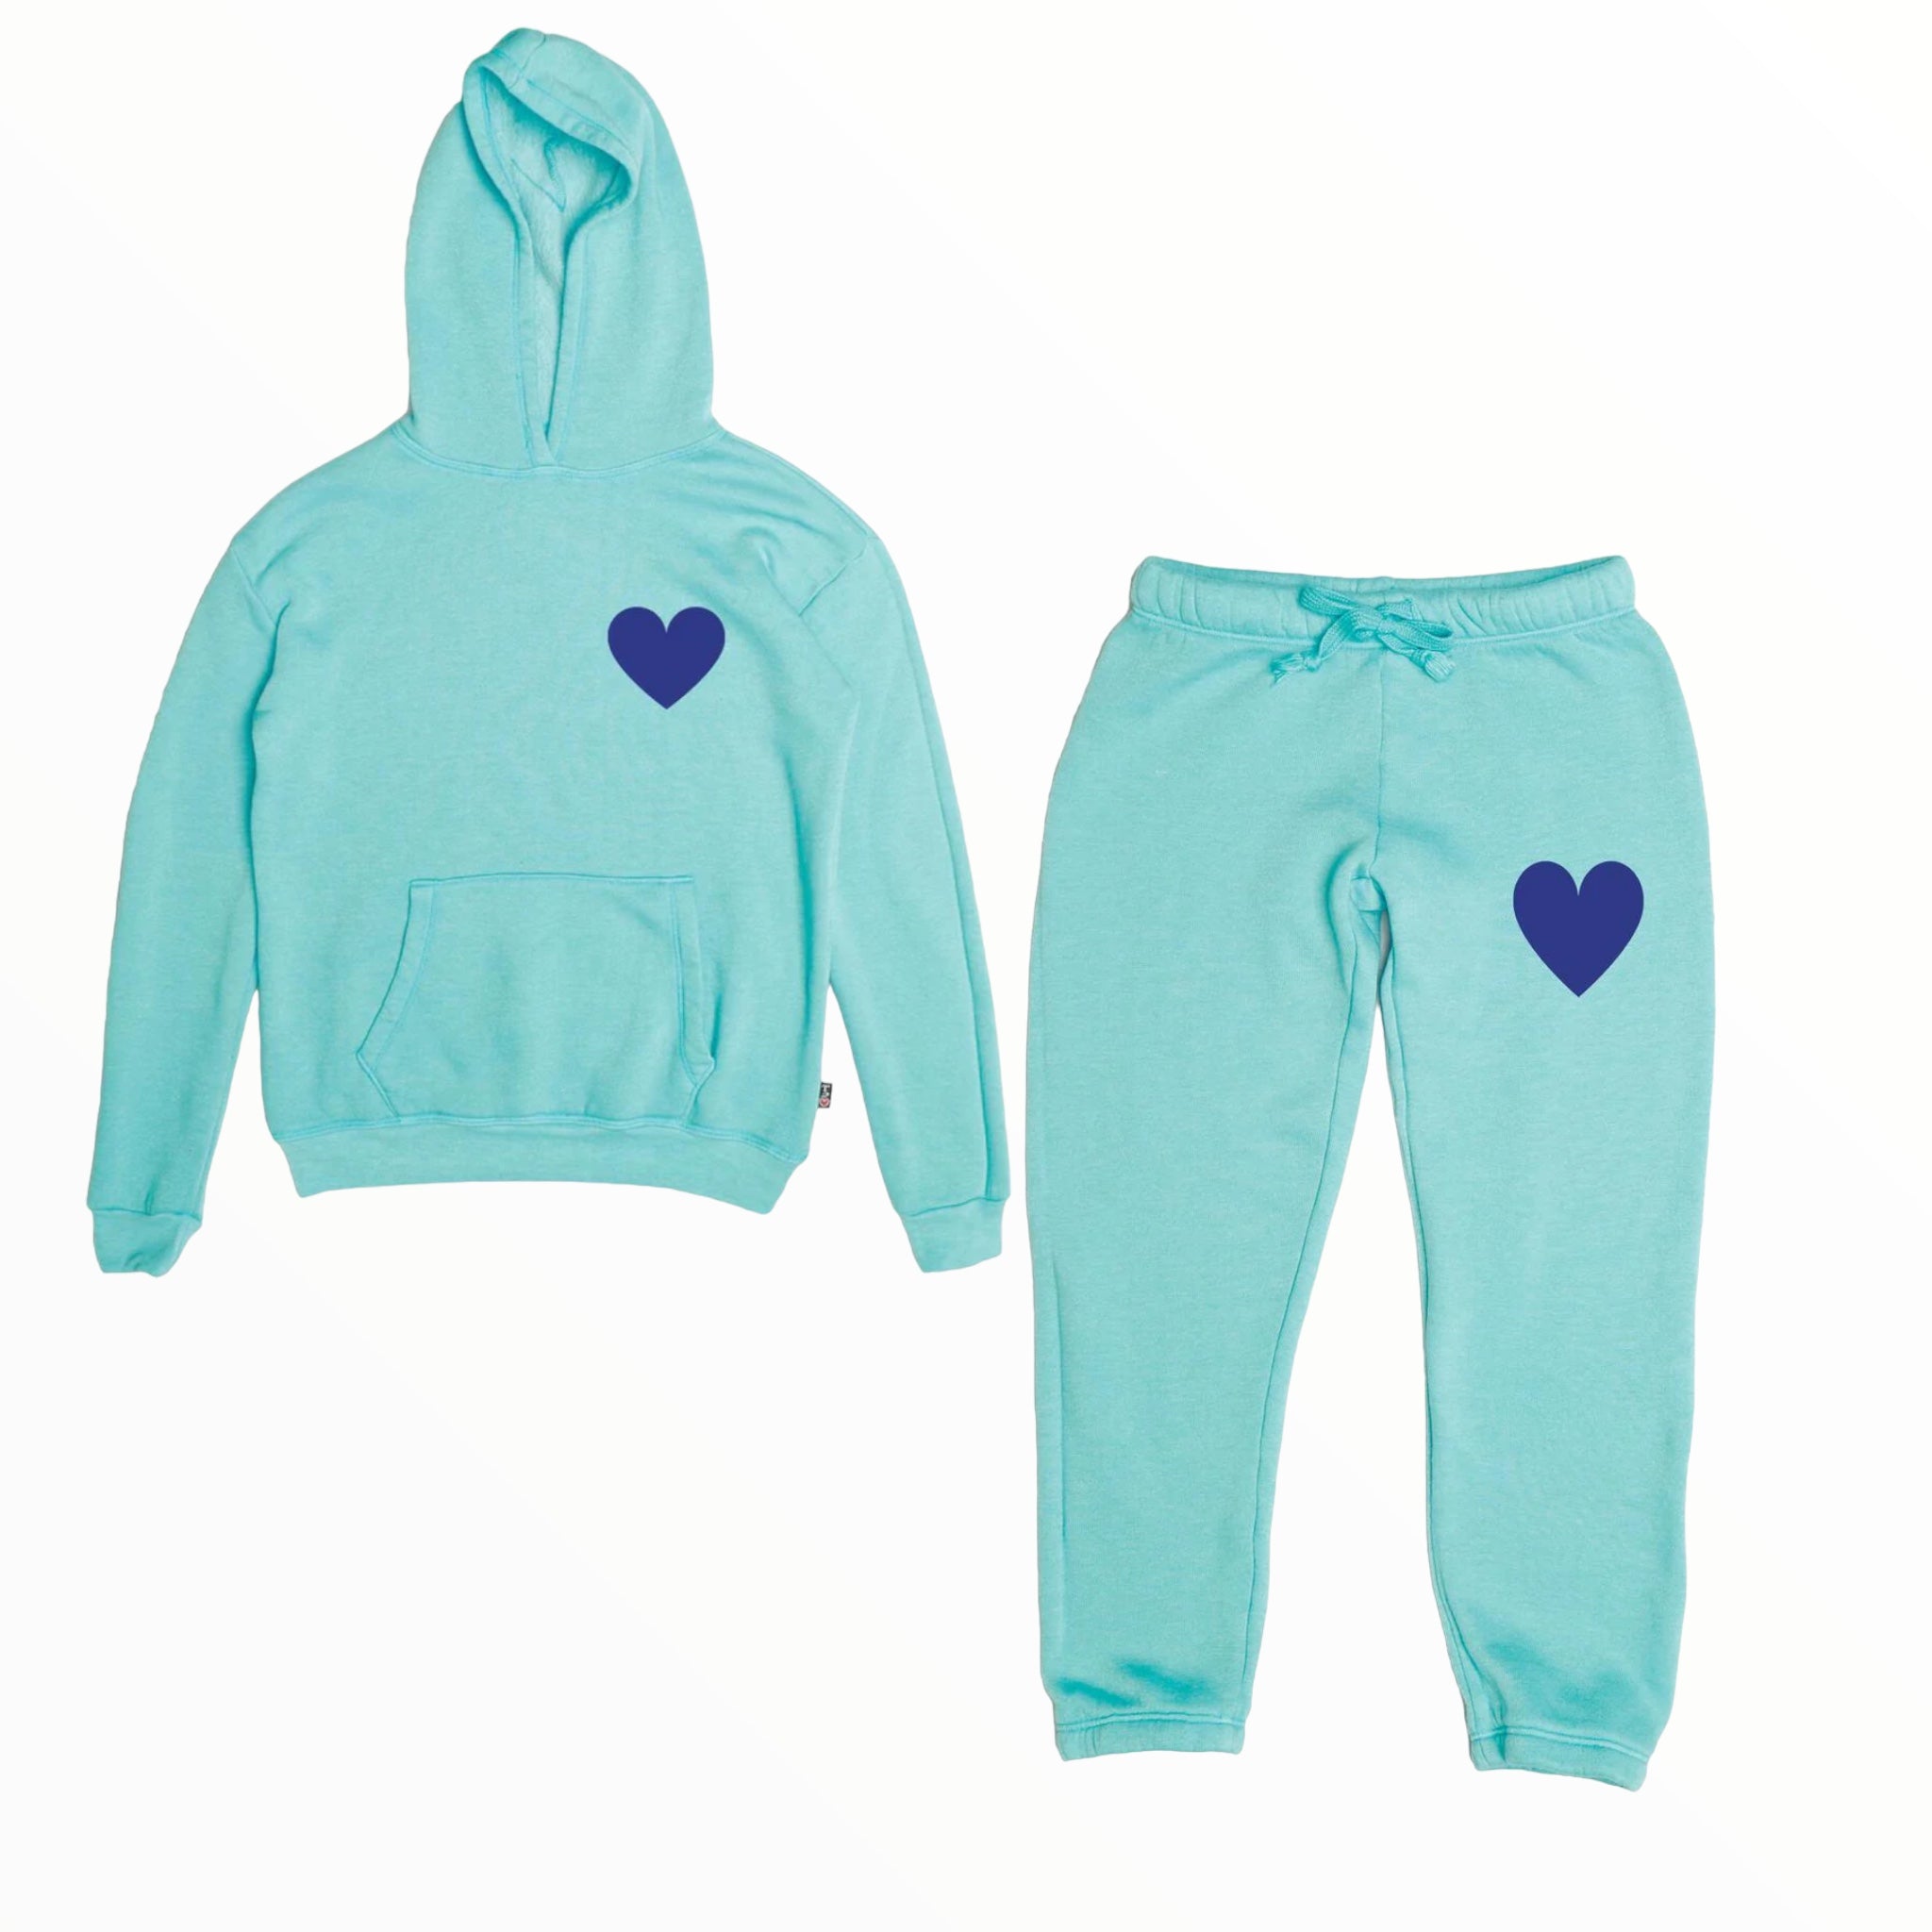 T2LOVE ATHLETIC ELSTIC WAIST/CUFF PANT- BLUE CURACAO/SMALL HEART